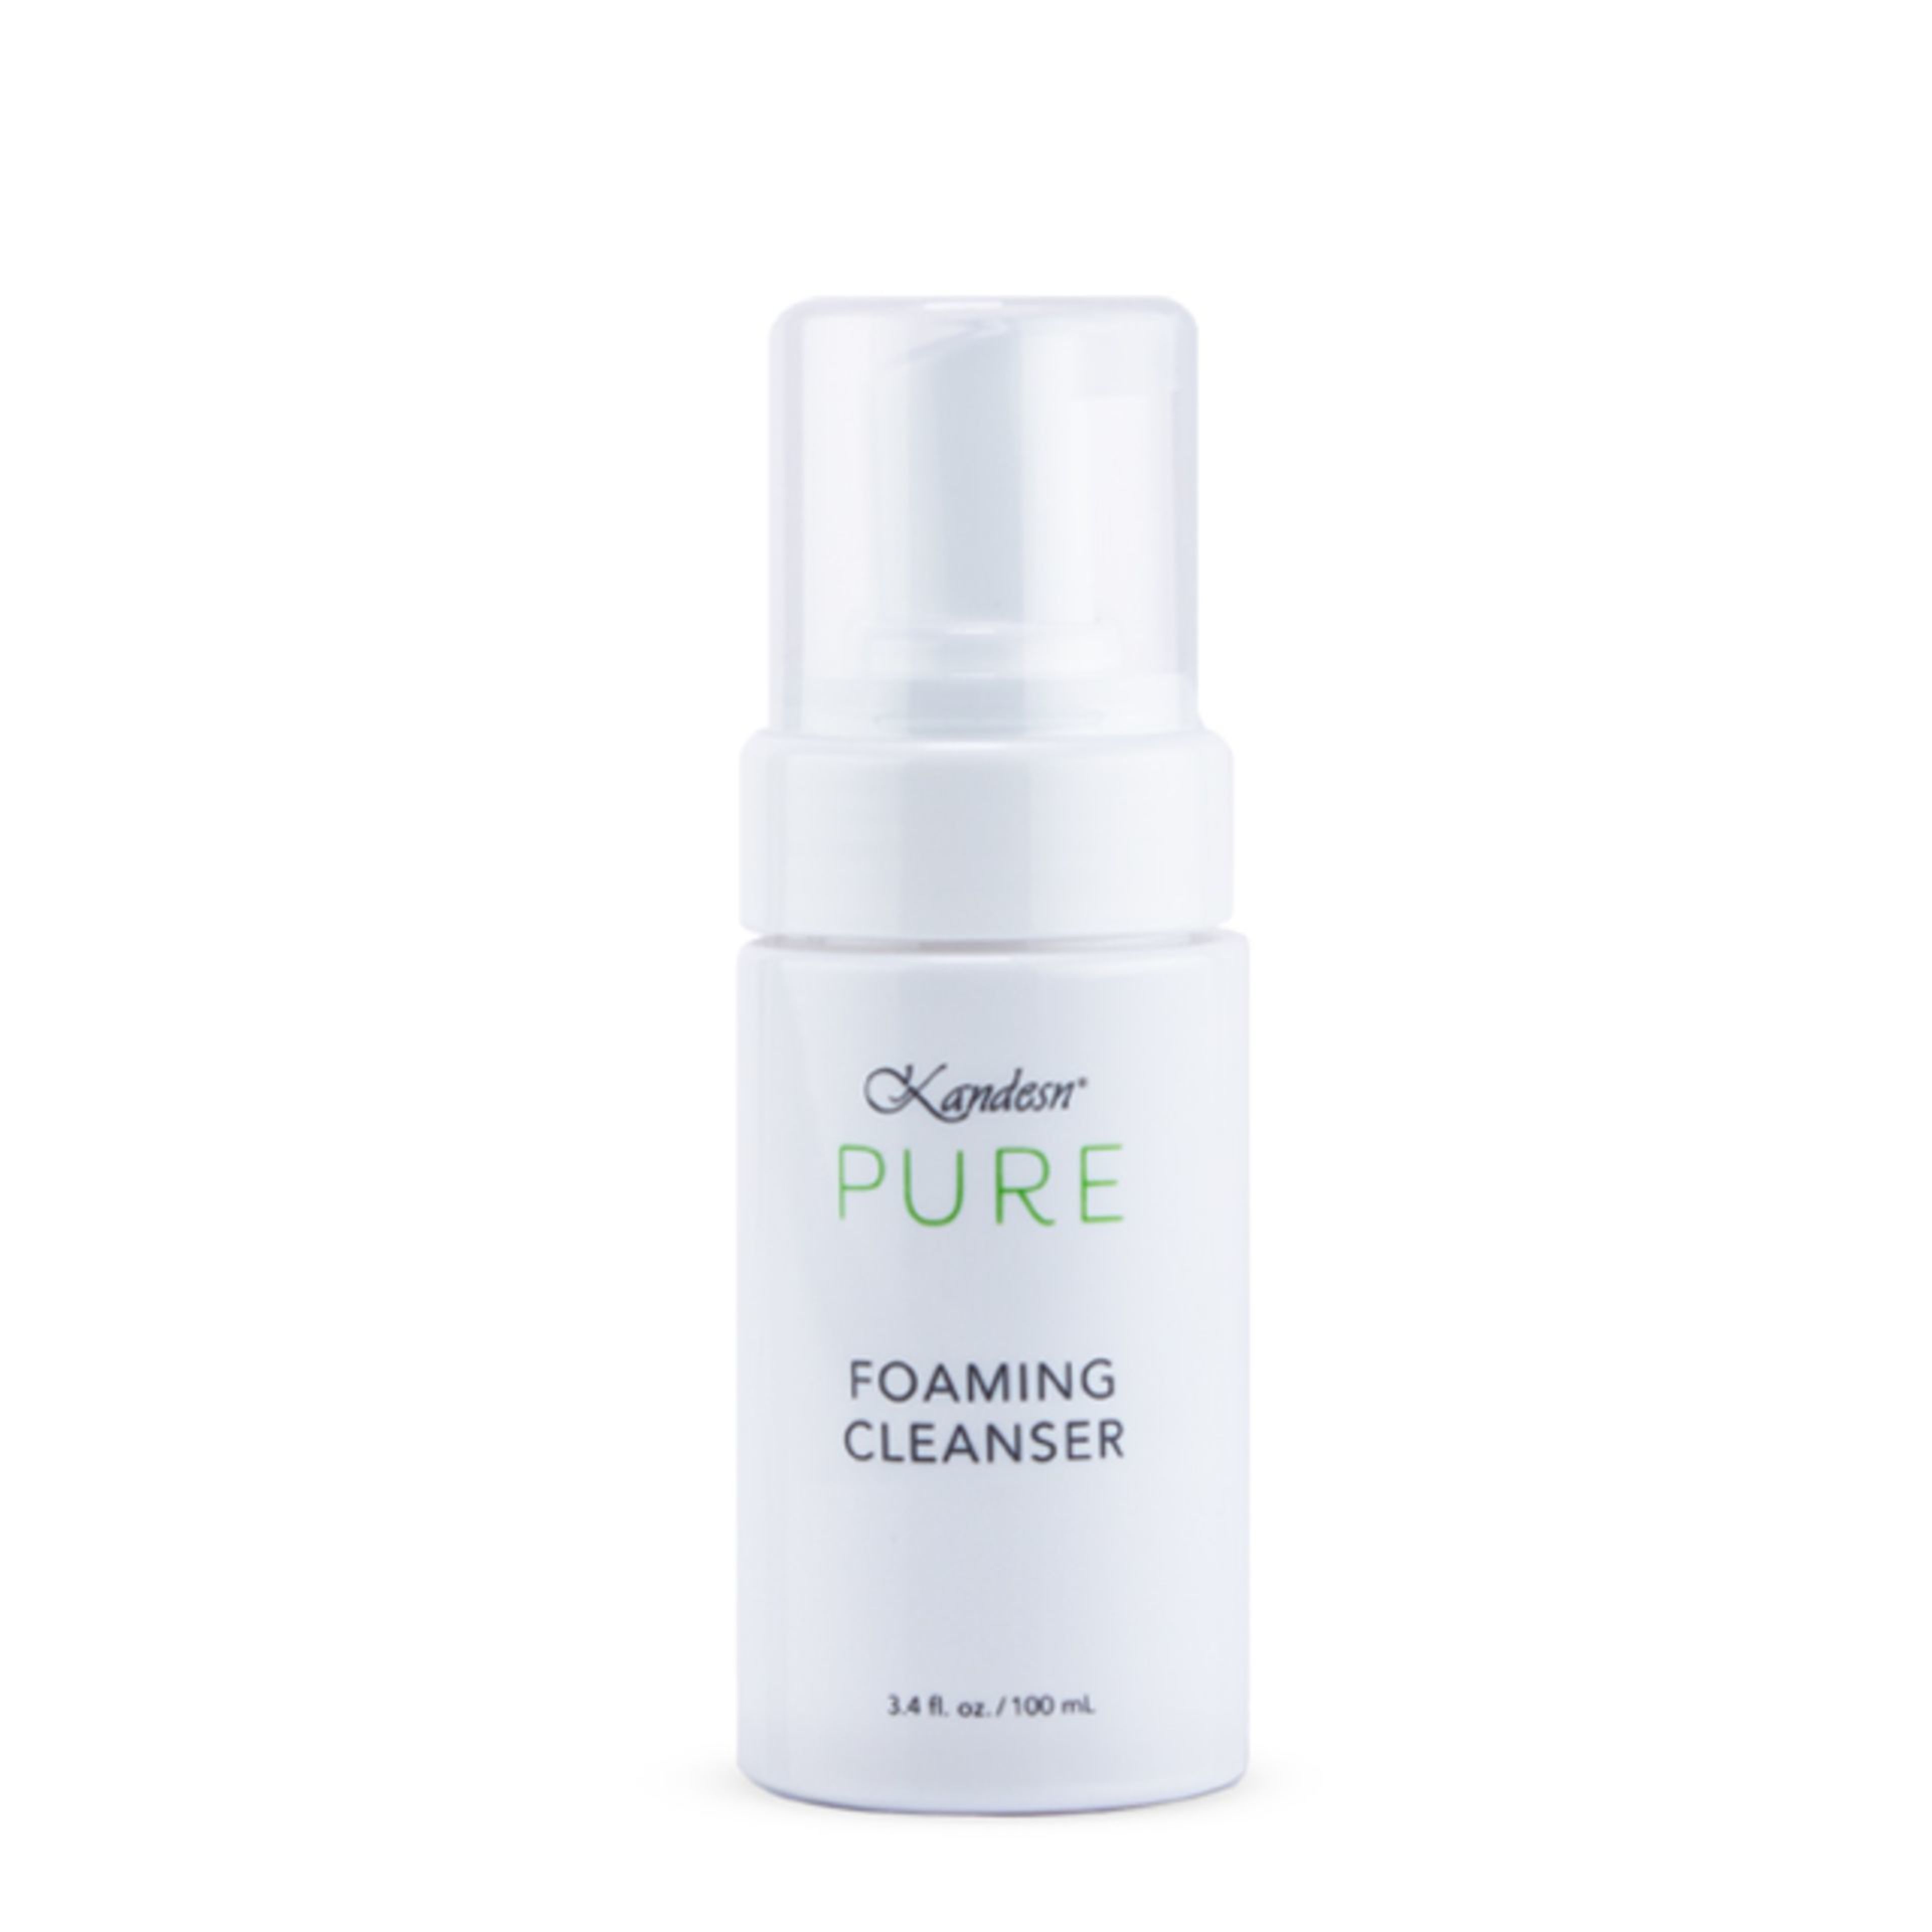 [HU] Kandesn® Pure Foaming Cleanser